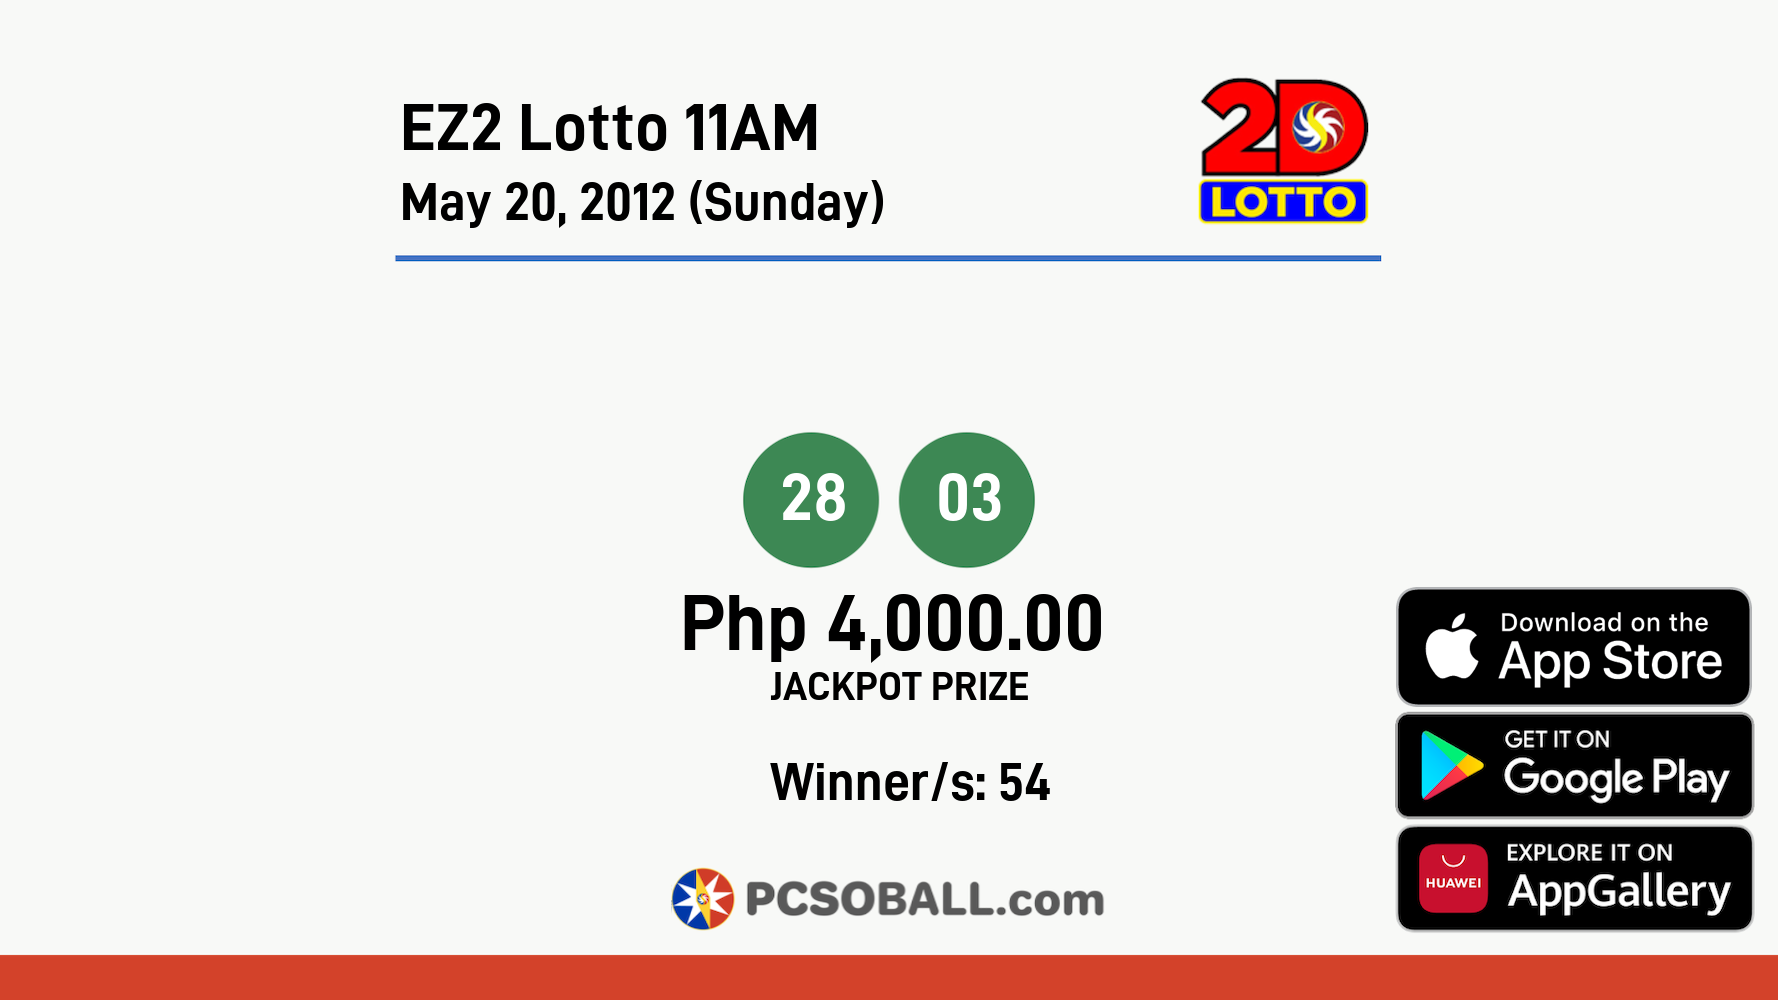 EZ2 Lotto 11AM May 20, 2012 (Sunday) Result